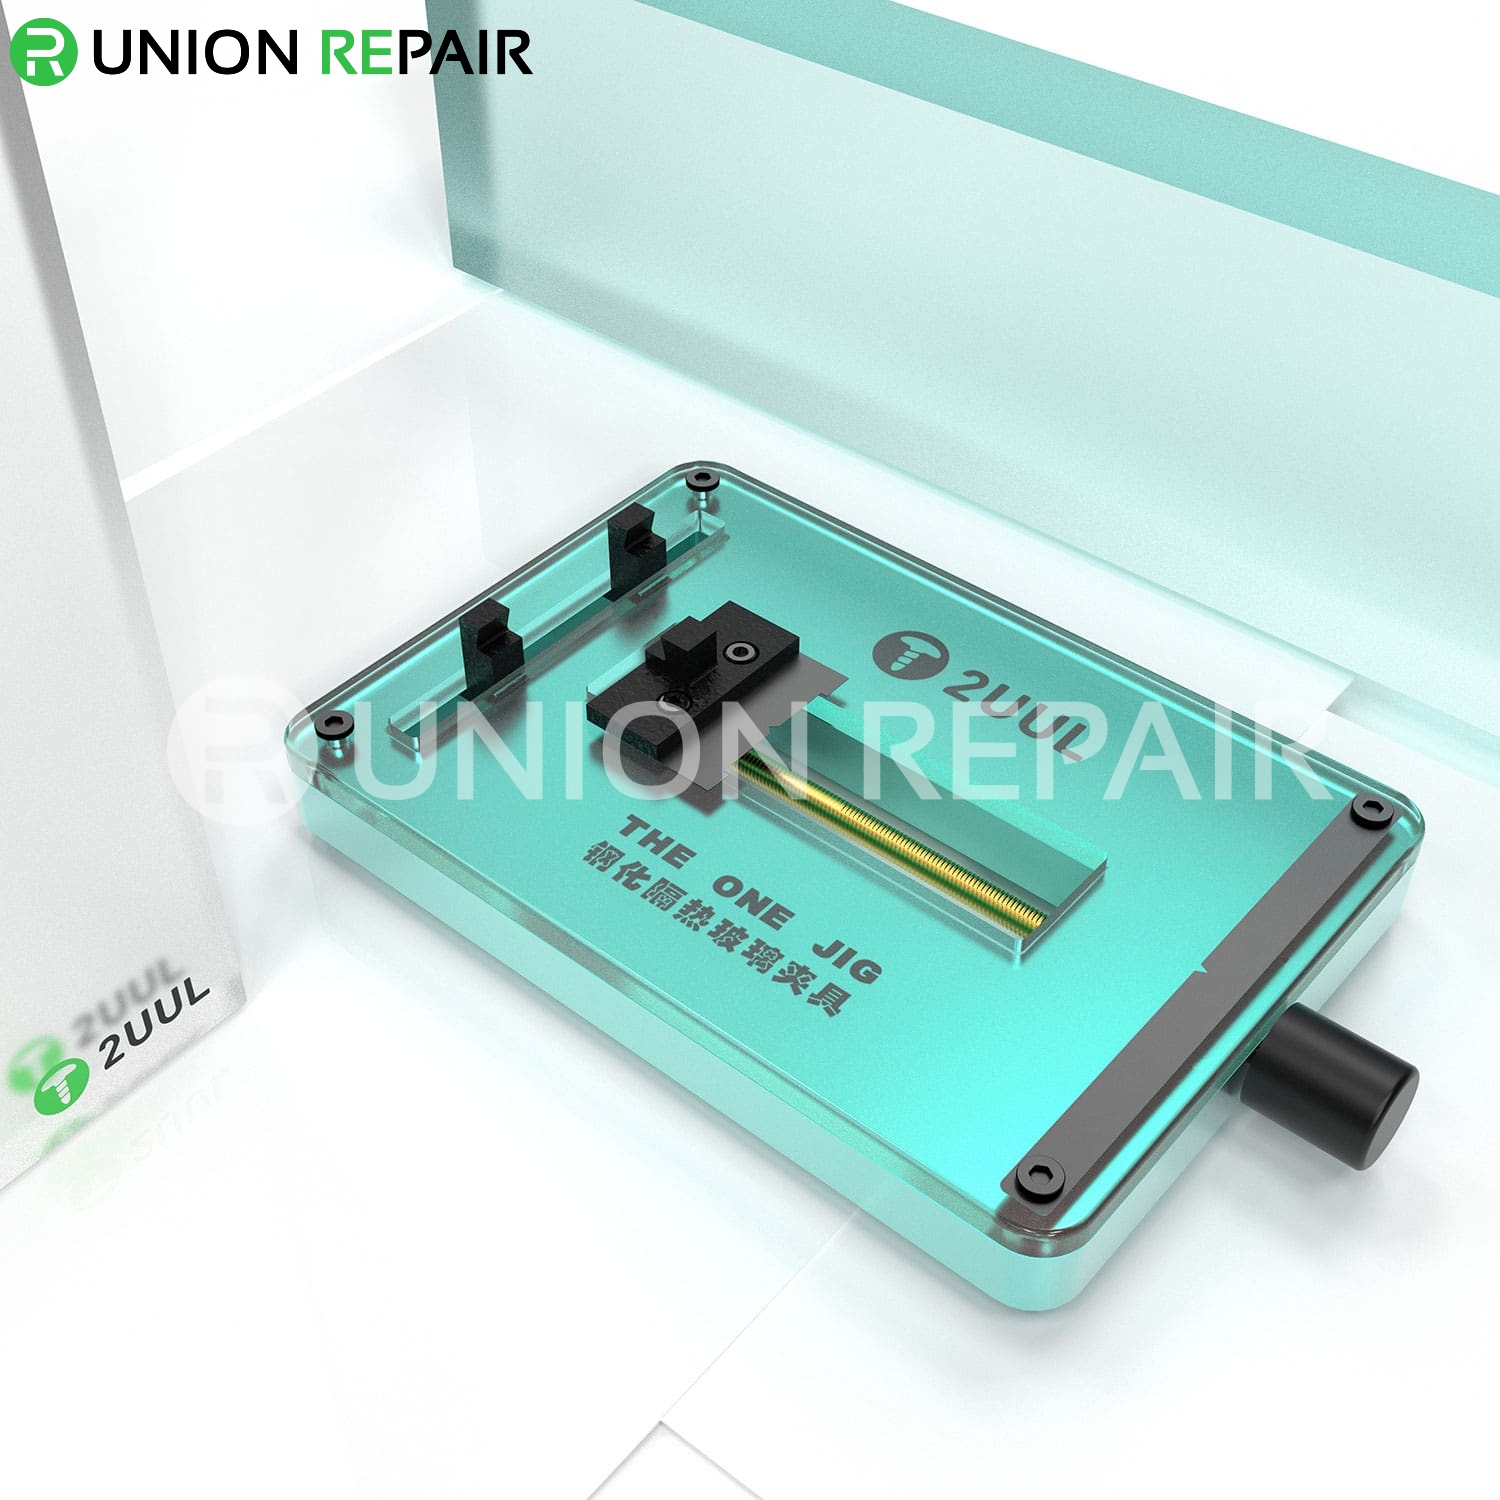 2UUL The One Jig with Tempered Glass for PCB Board Holder Fixture